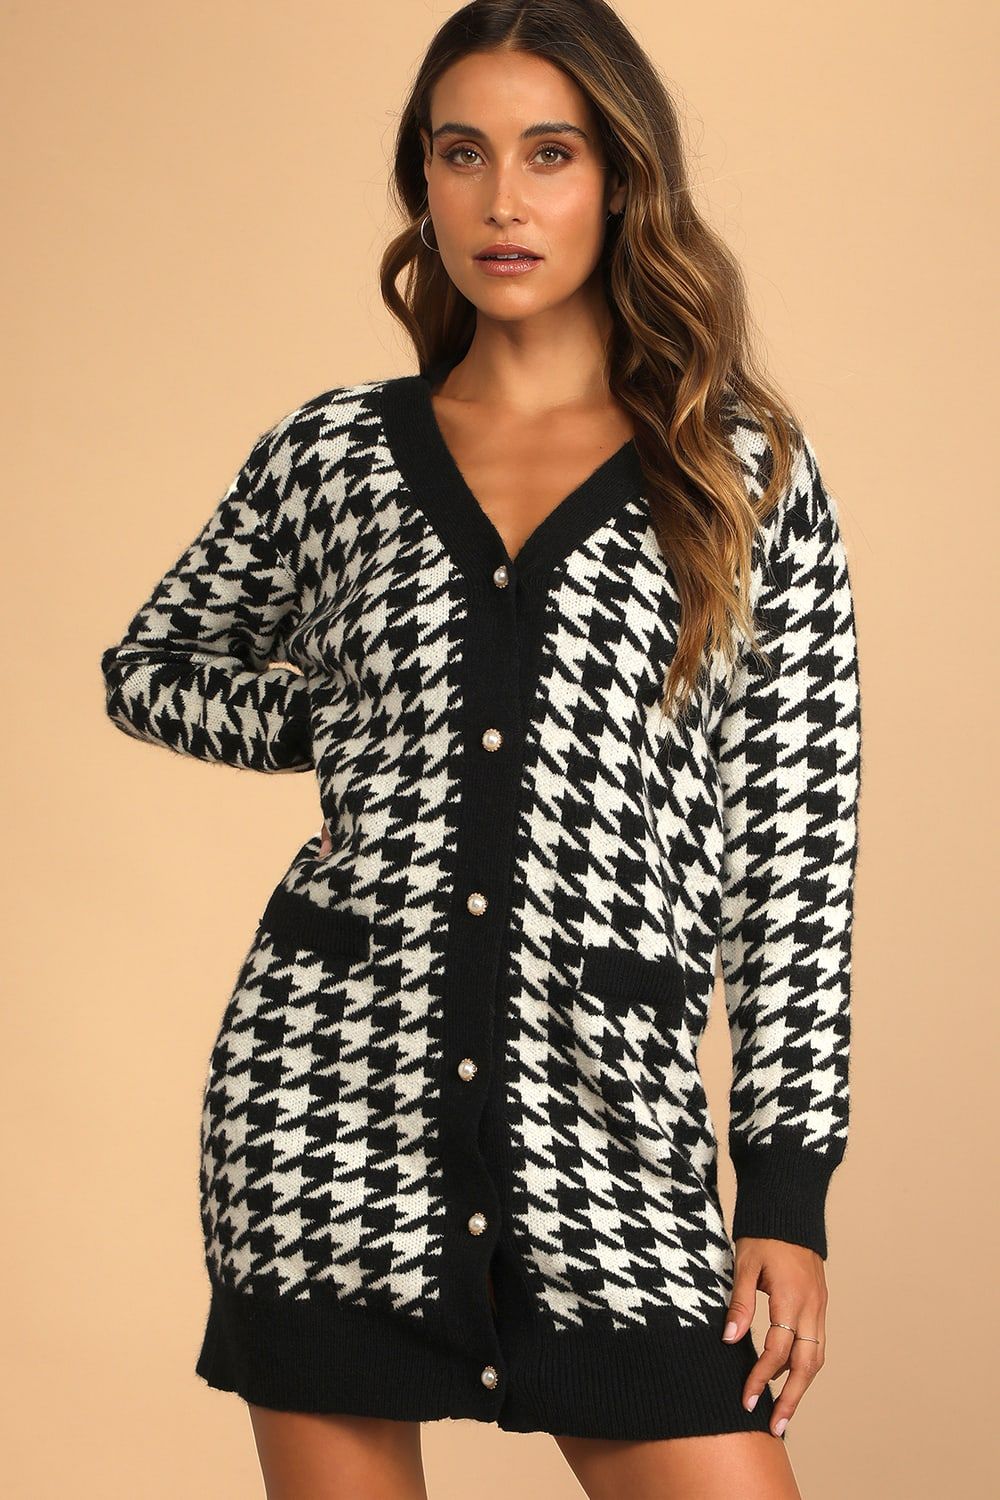 Truly Iconic Black and White Houndstooth Cardigan Sweater Dress | Lulus (US)